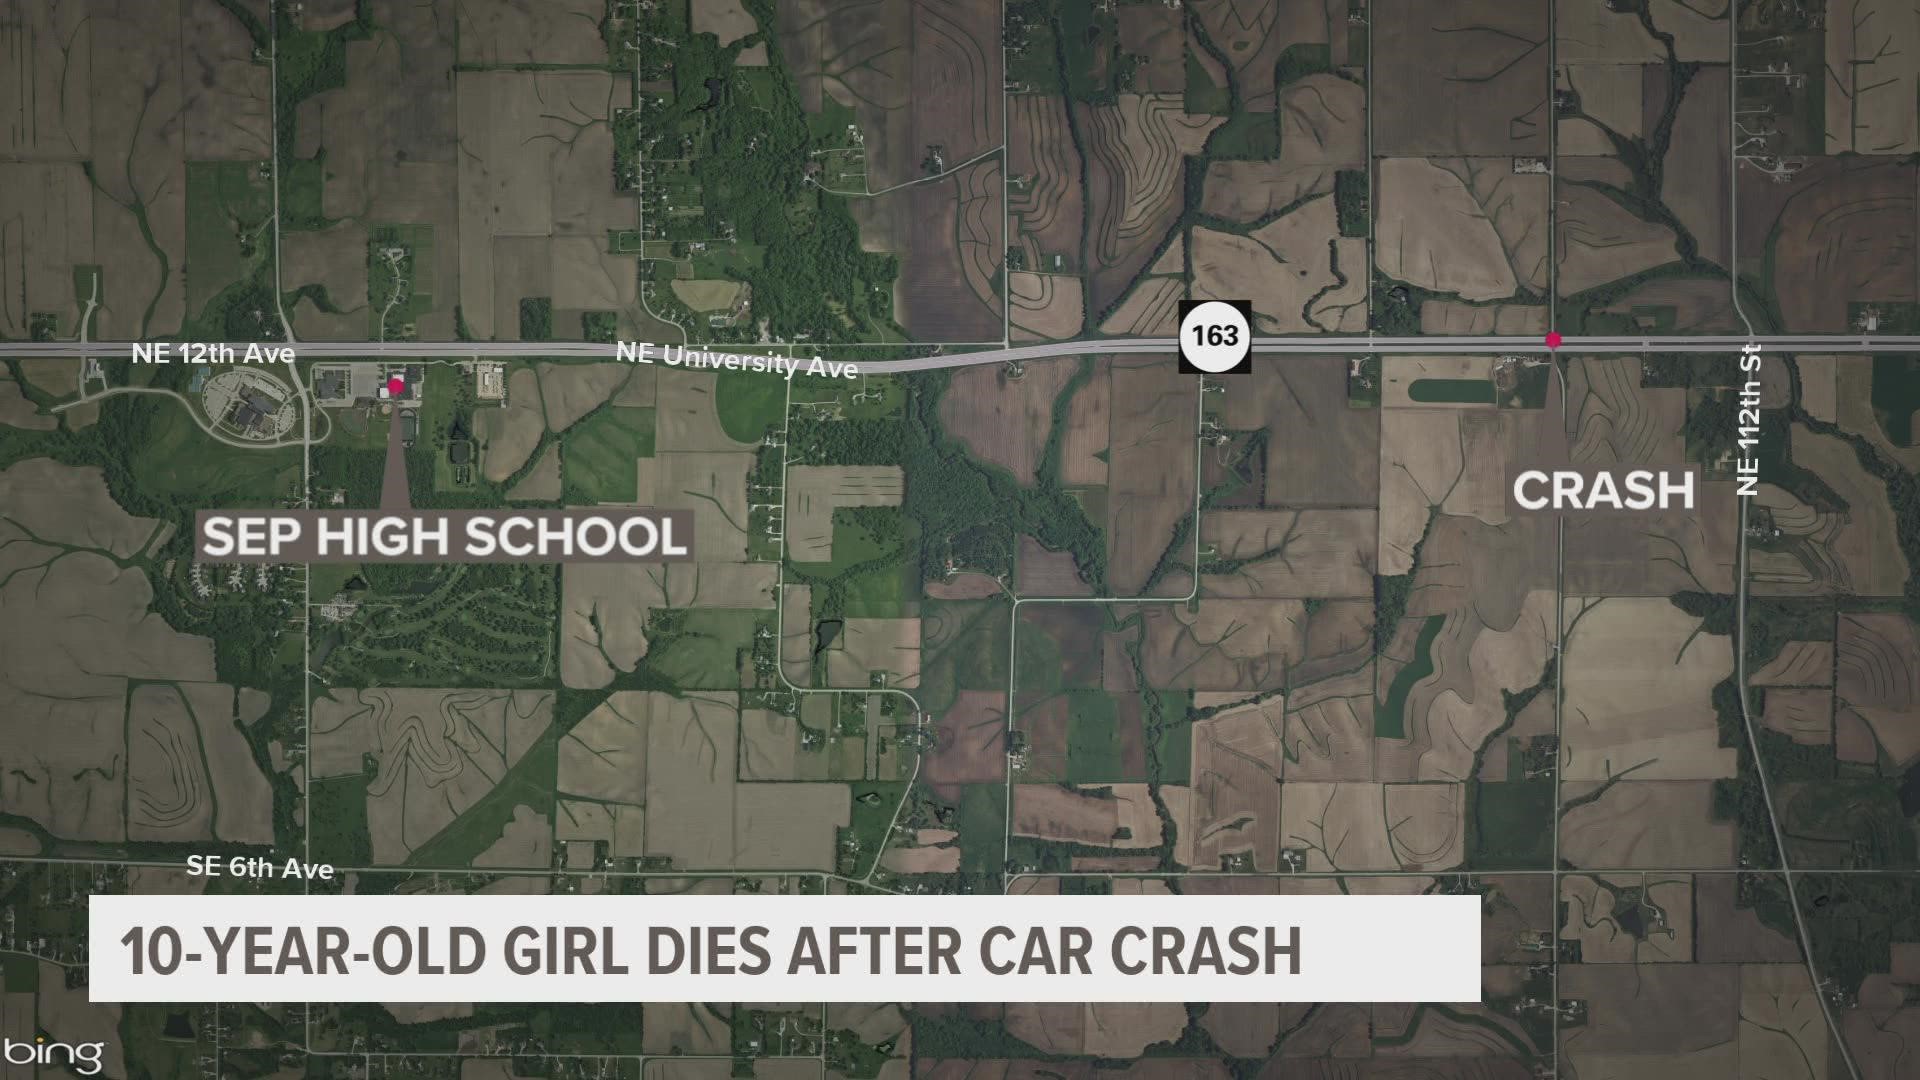 On Saturday, Oct. 8, the girl passed away from the injuries she sustained.